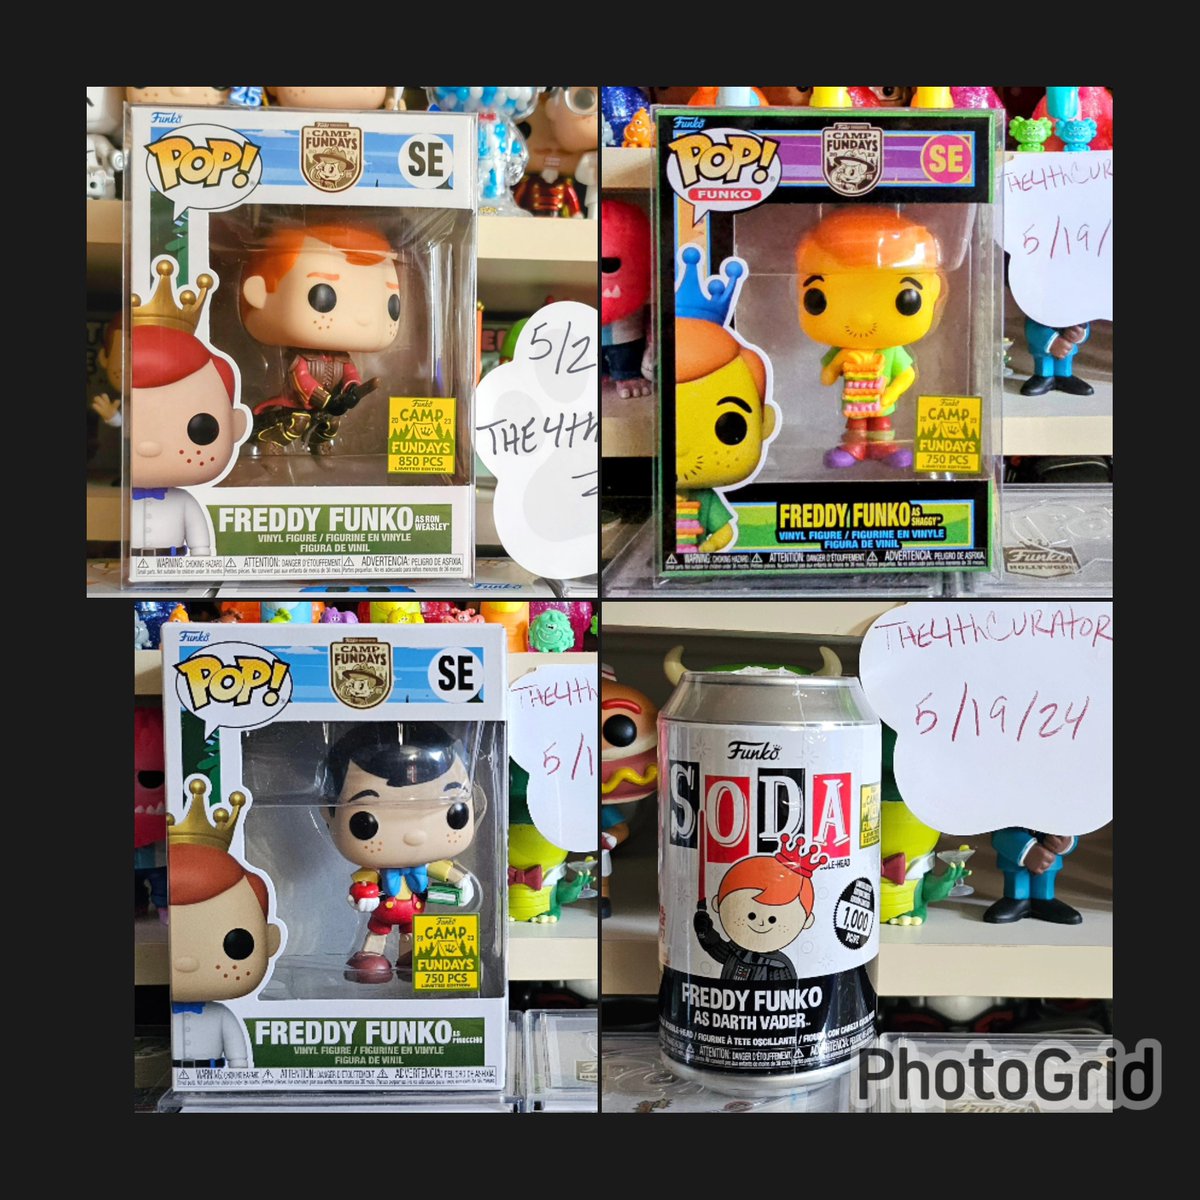 Have a few #FreddyFunko up for sale! DM for pricing and more photos. #OrginalFunko #FunkoCollector #FunkoCommunity #CampFundays